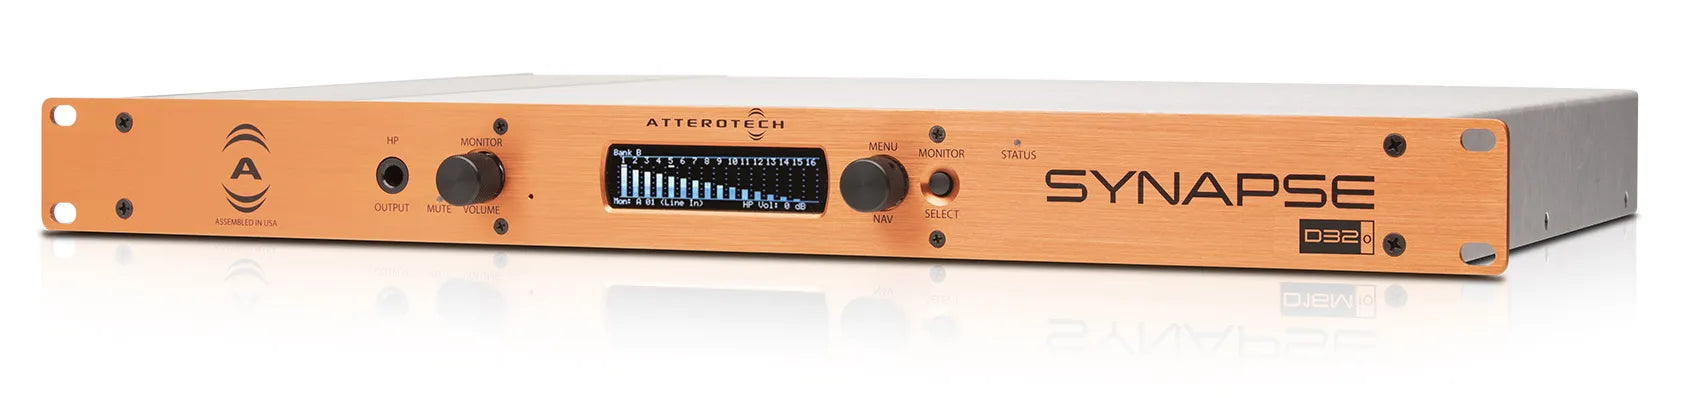 Attero Tech Synapse  D32o 32 Channel Line Out Dante/AES67 Interface, 1RU